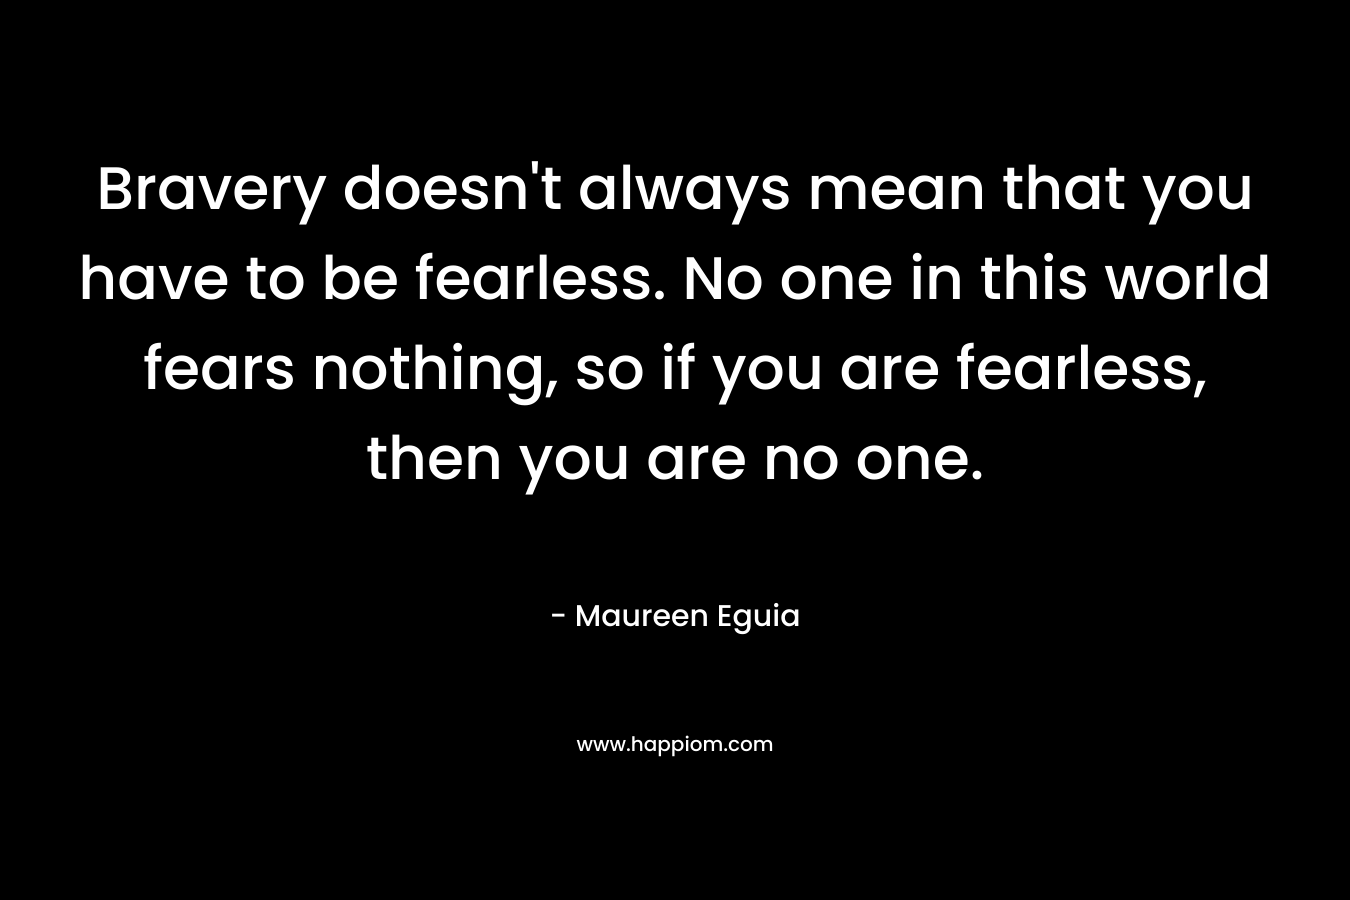 Bravery doesn't always mean that you have to be fearless. No one in this world fears nothing, so if you are fearless, then you are no one.